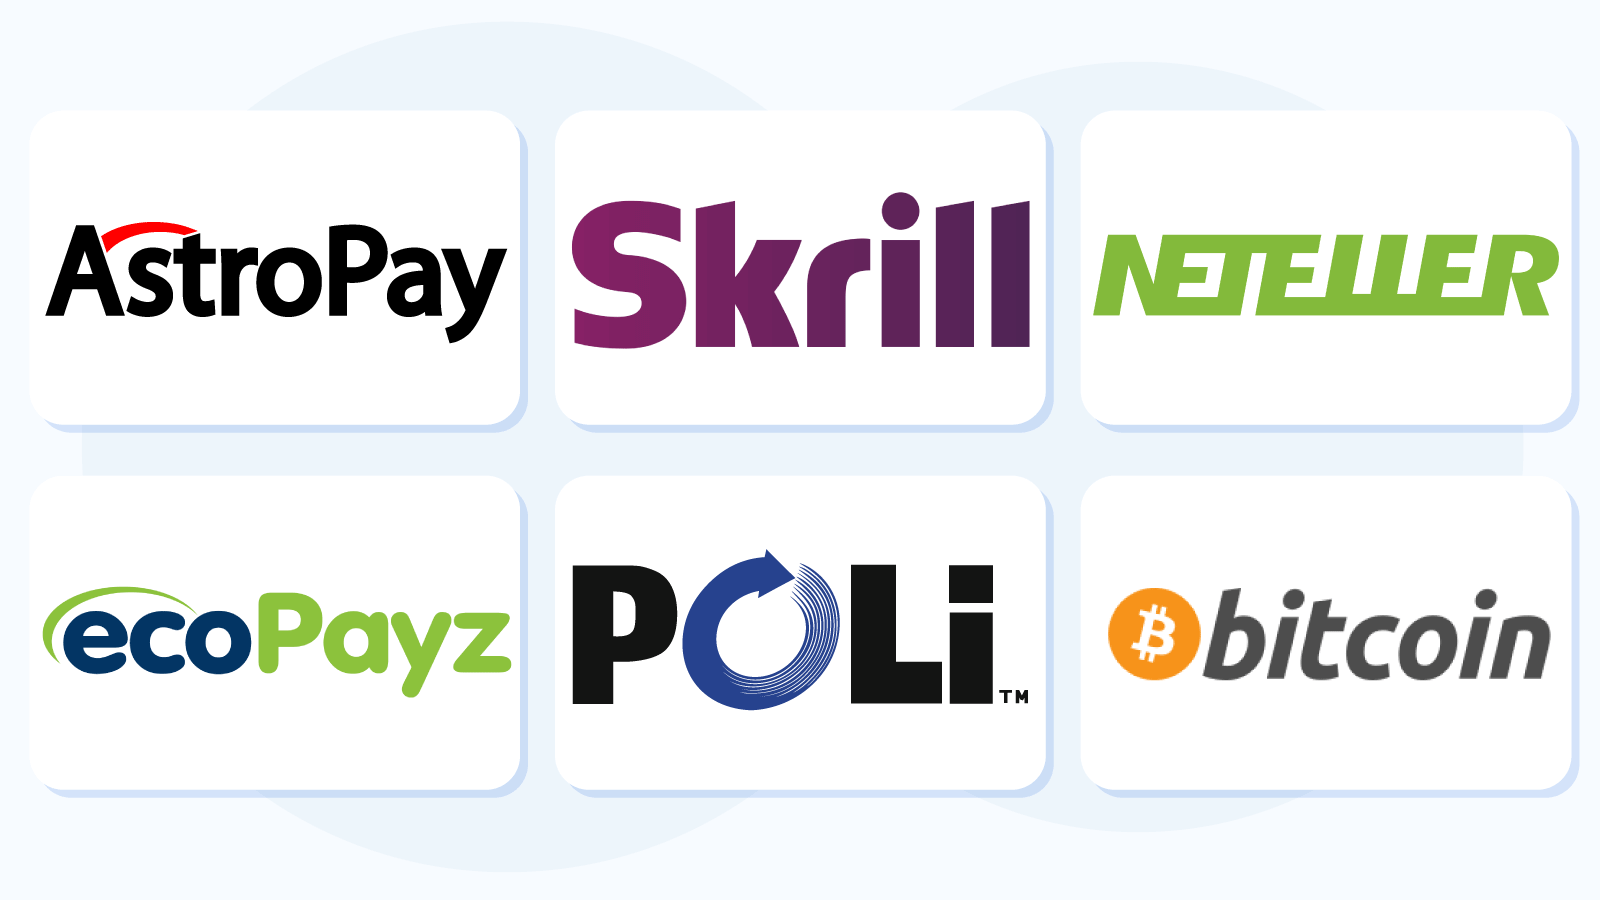 Compare Fastest Withdrawal E-wallet Payment Providers in NZ